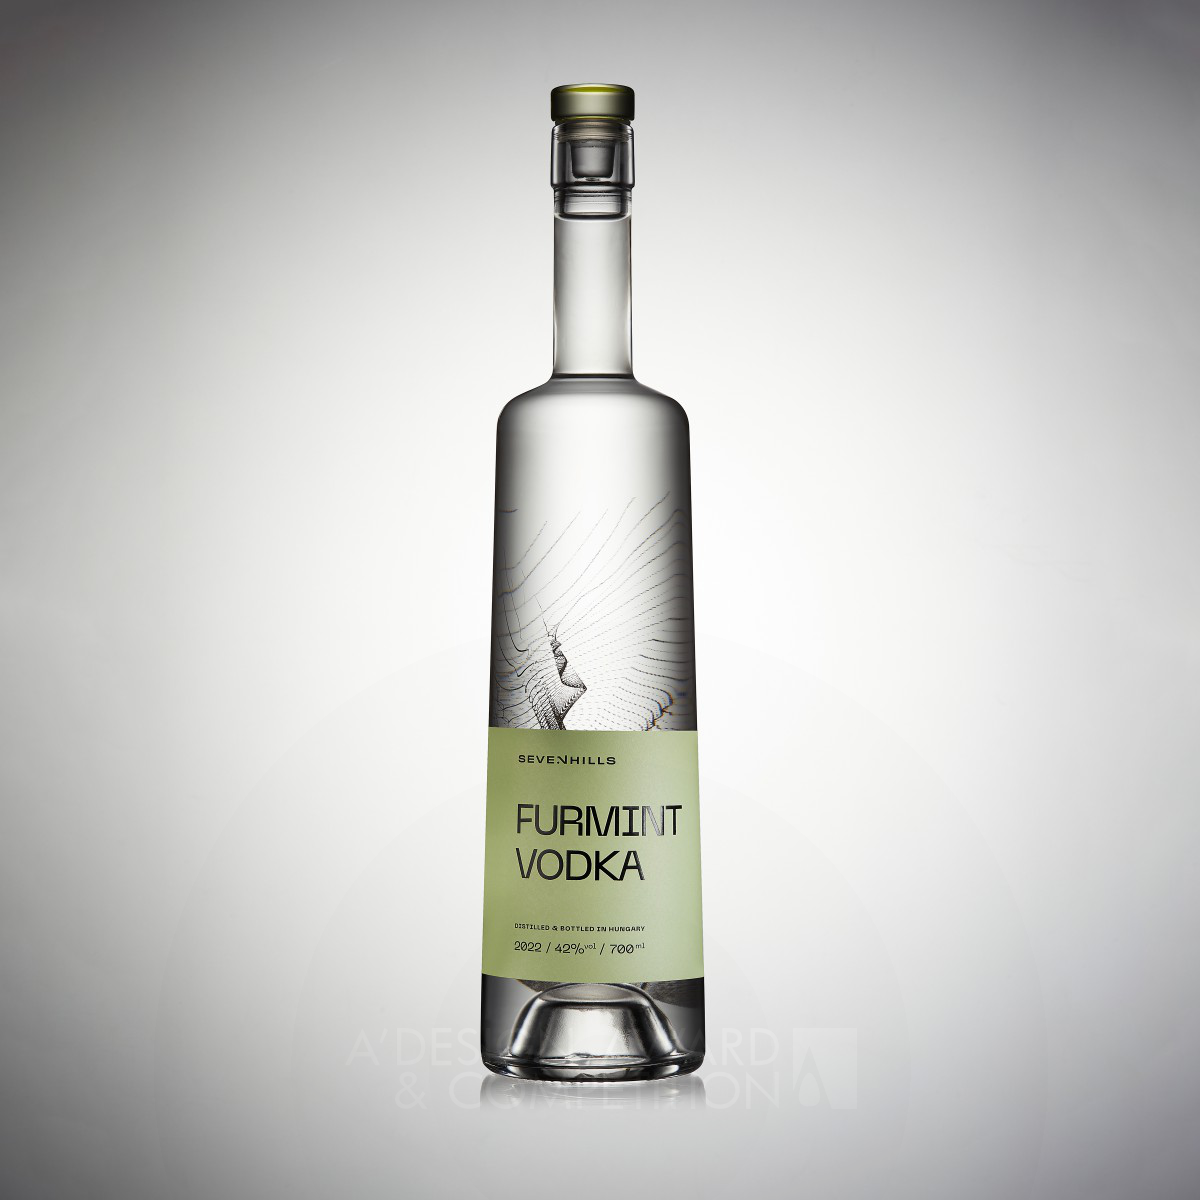 Graphasel Design Studio wins Silver at the prestigious A' Packaging Design Award with Furmint Vodka Beverage Packaging.